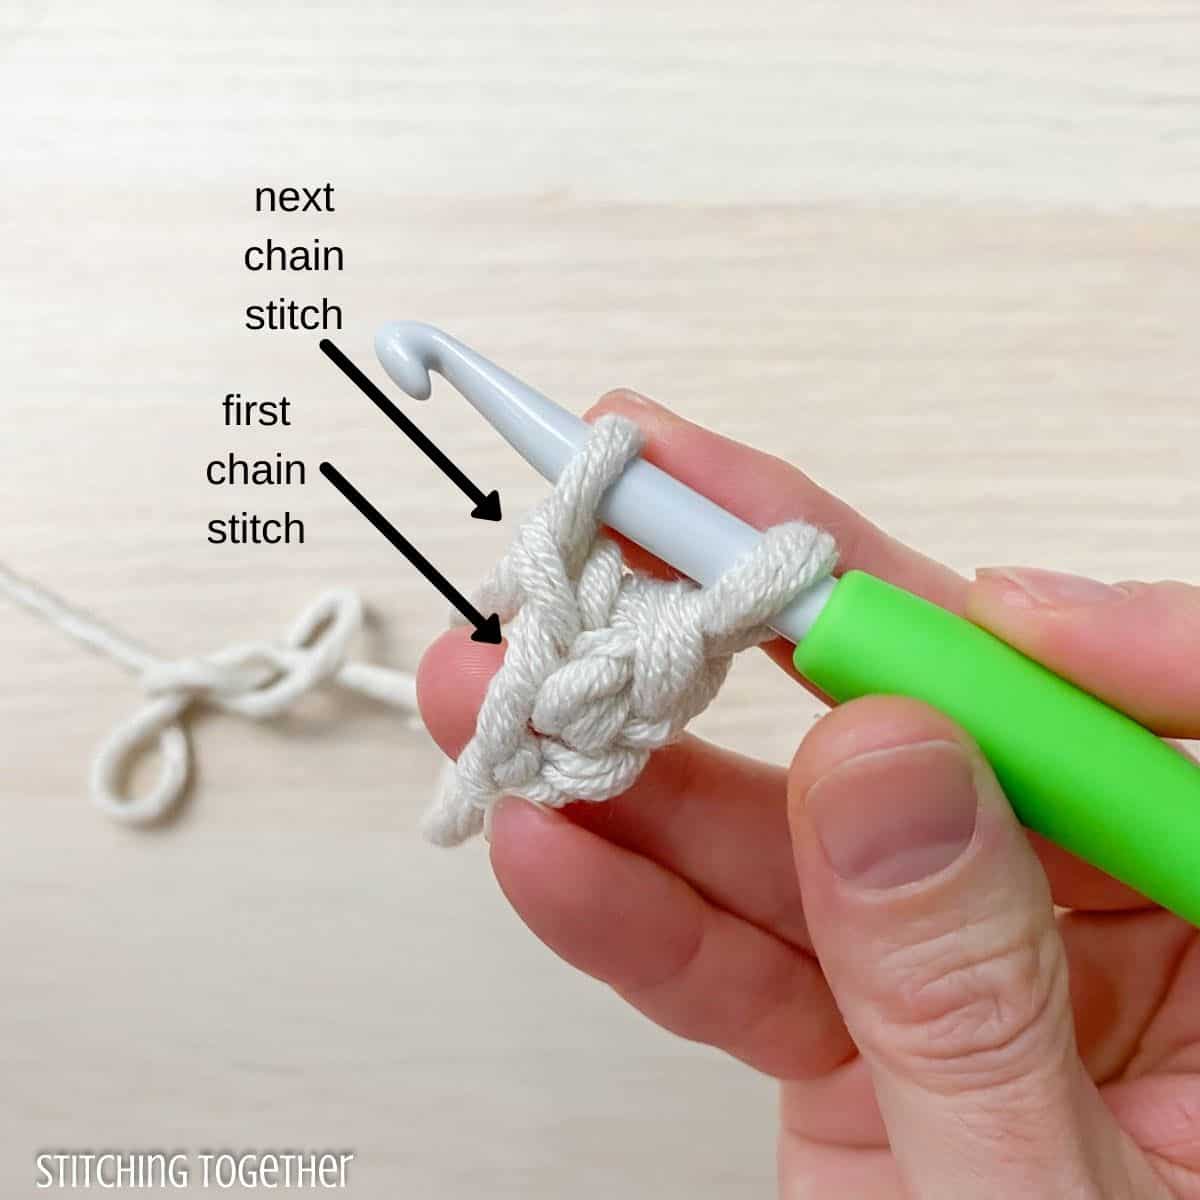 hand, yarn, and hook showing how to single crochet foundation stitch